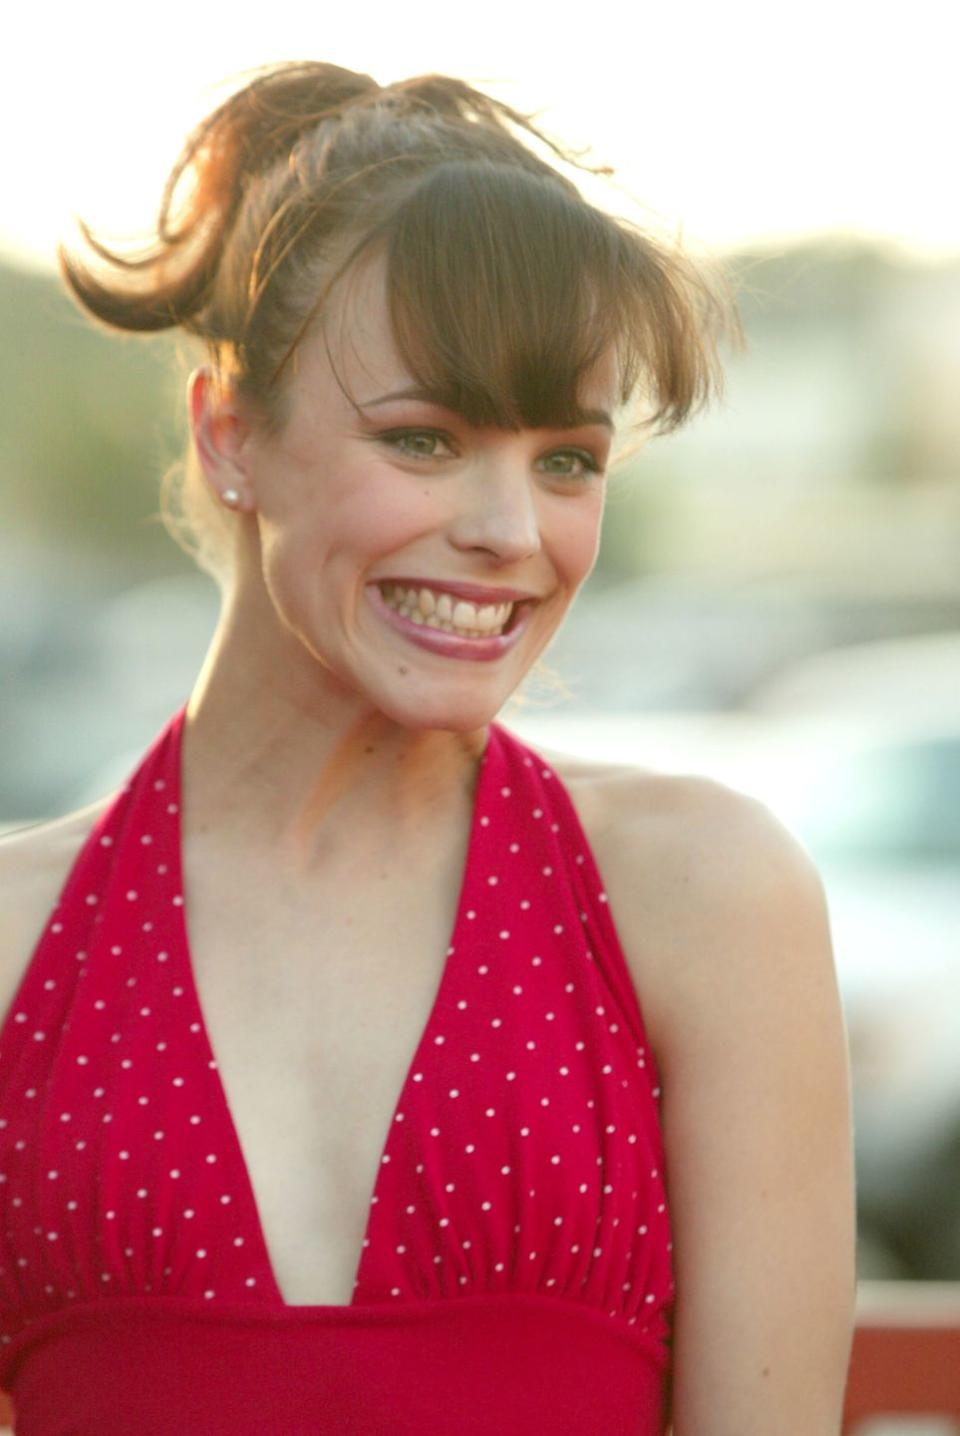 Rachel McAdams had less than one day to prepare for her audition.